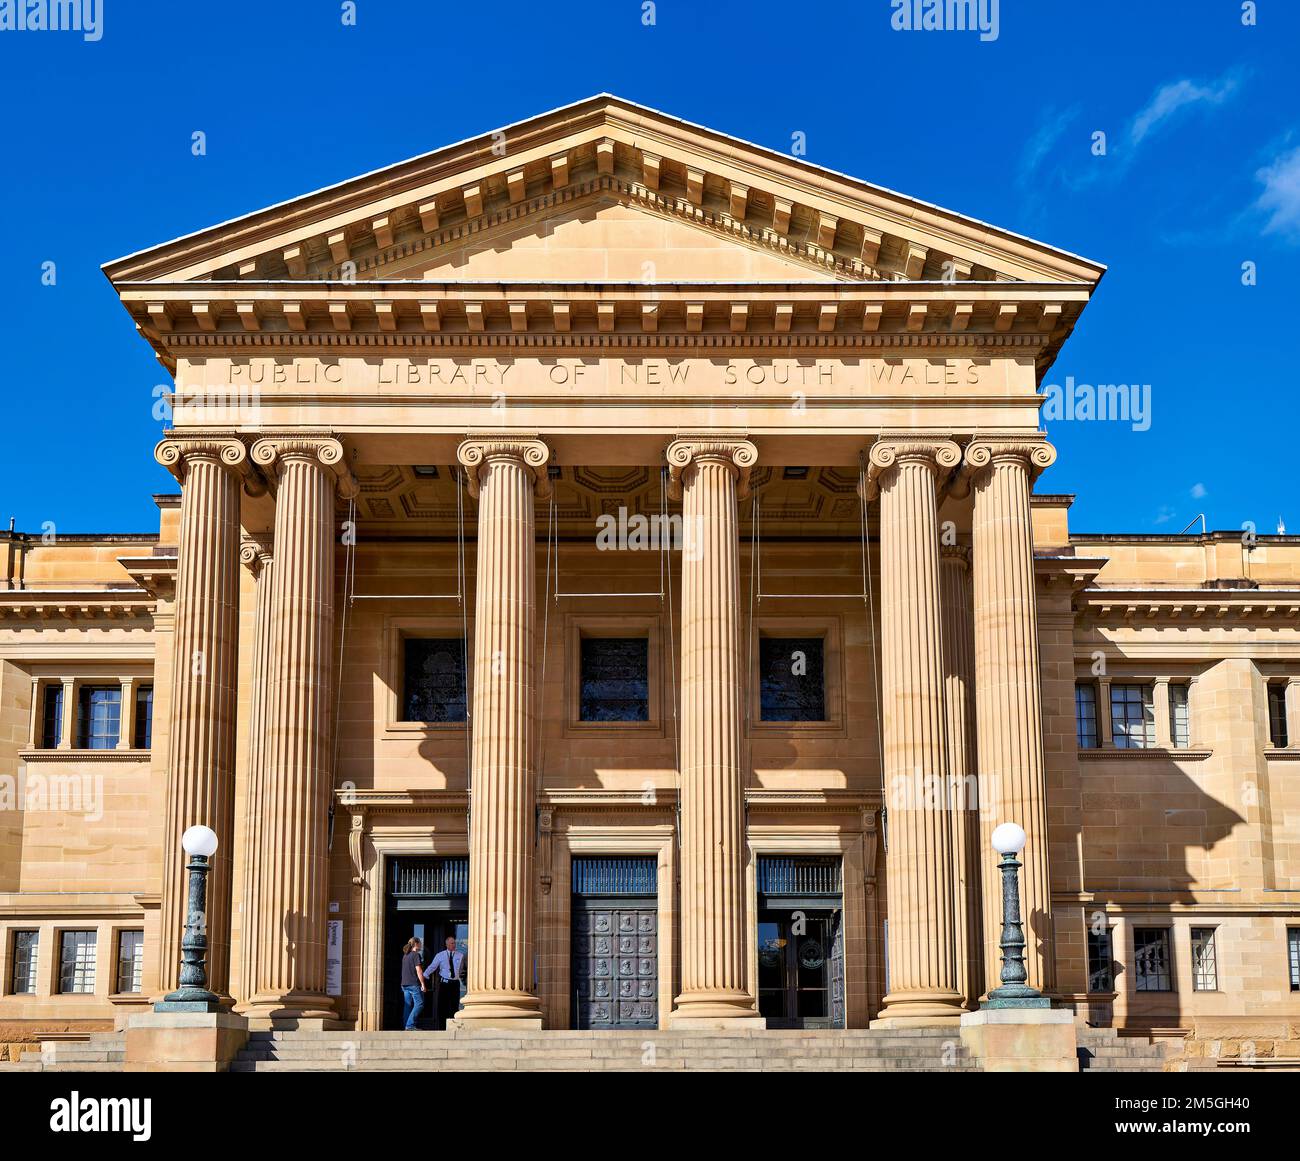 Sydney. Australia. The Public Library of New South Wales Stock Photo